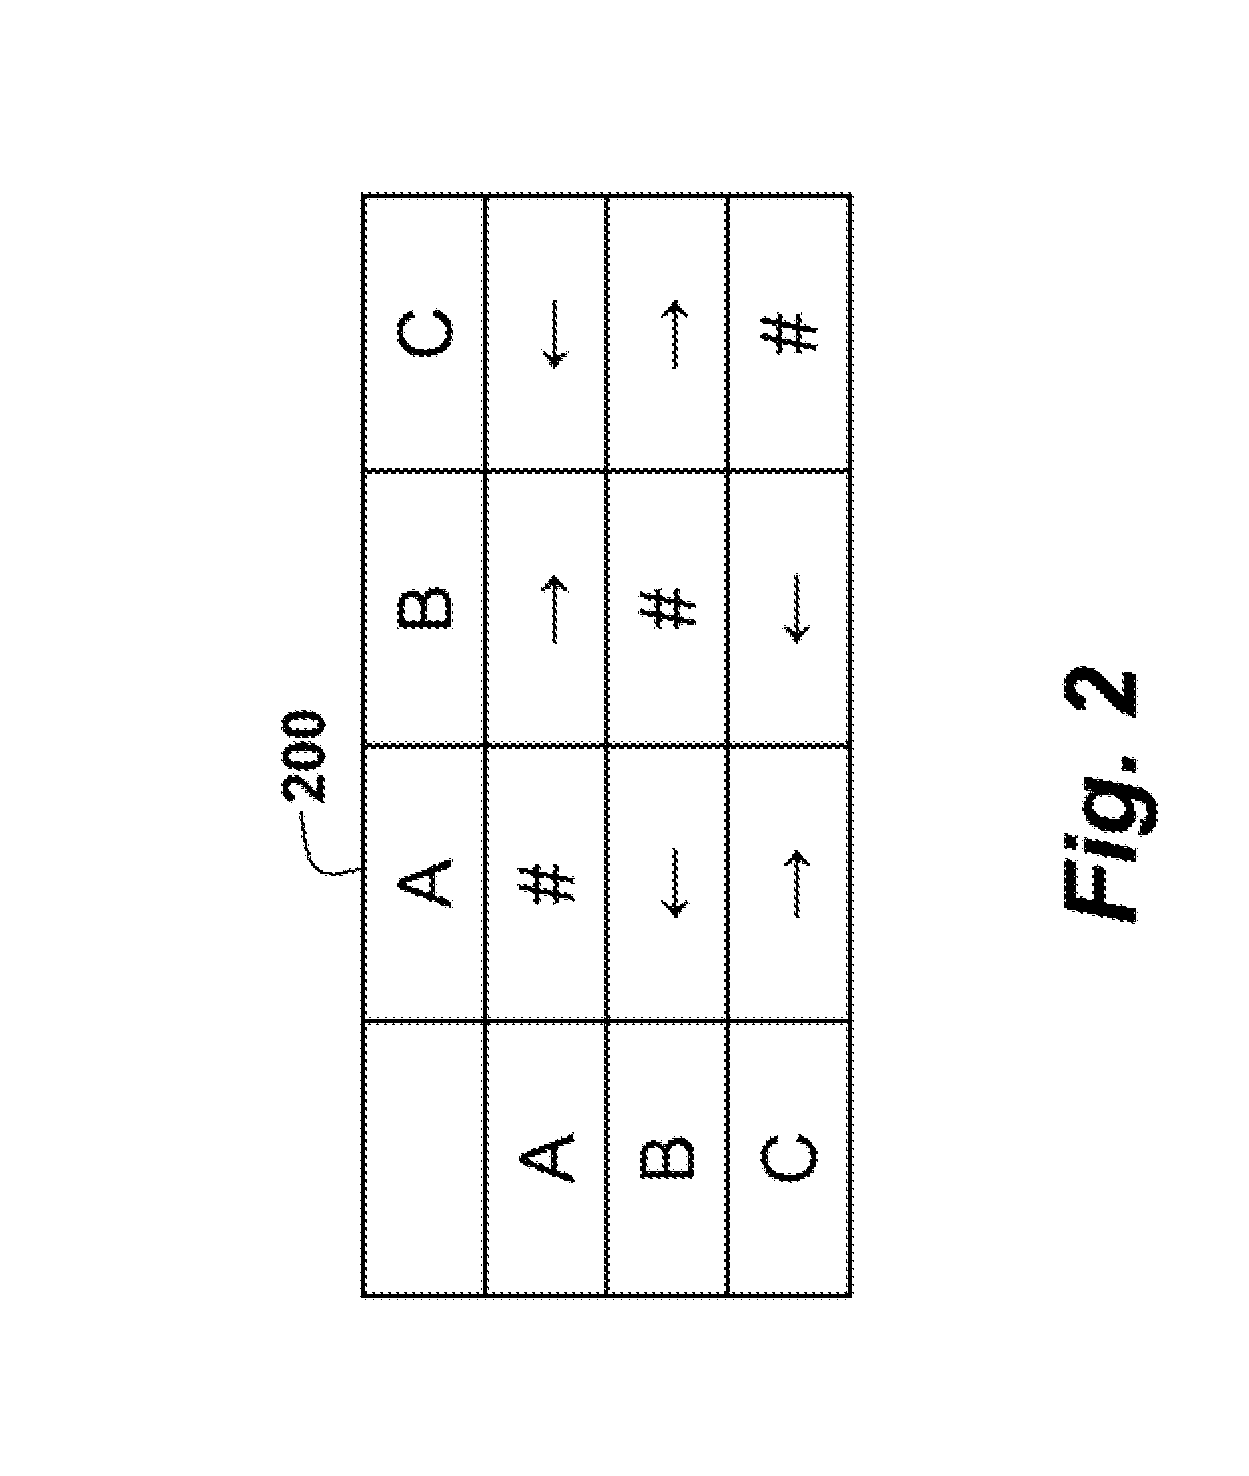 Method for Anomaly Detection in Discrete Manufacturing Processes